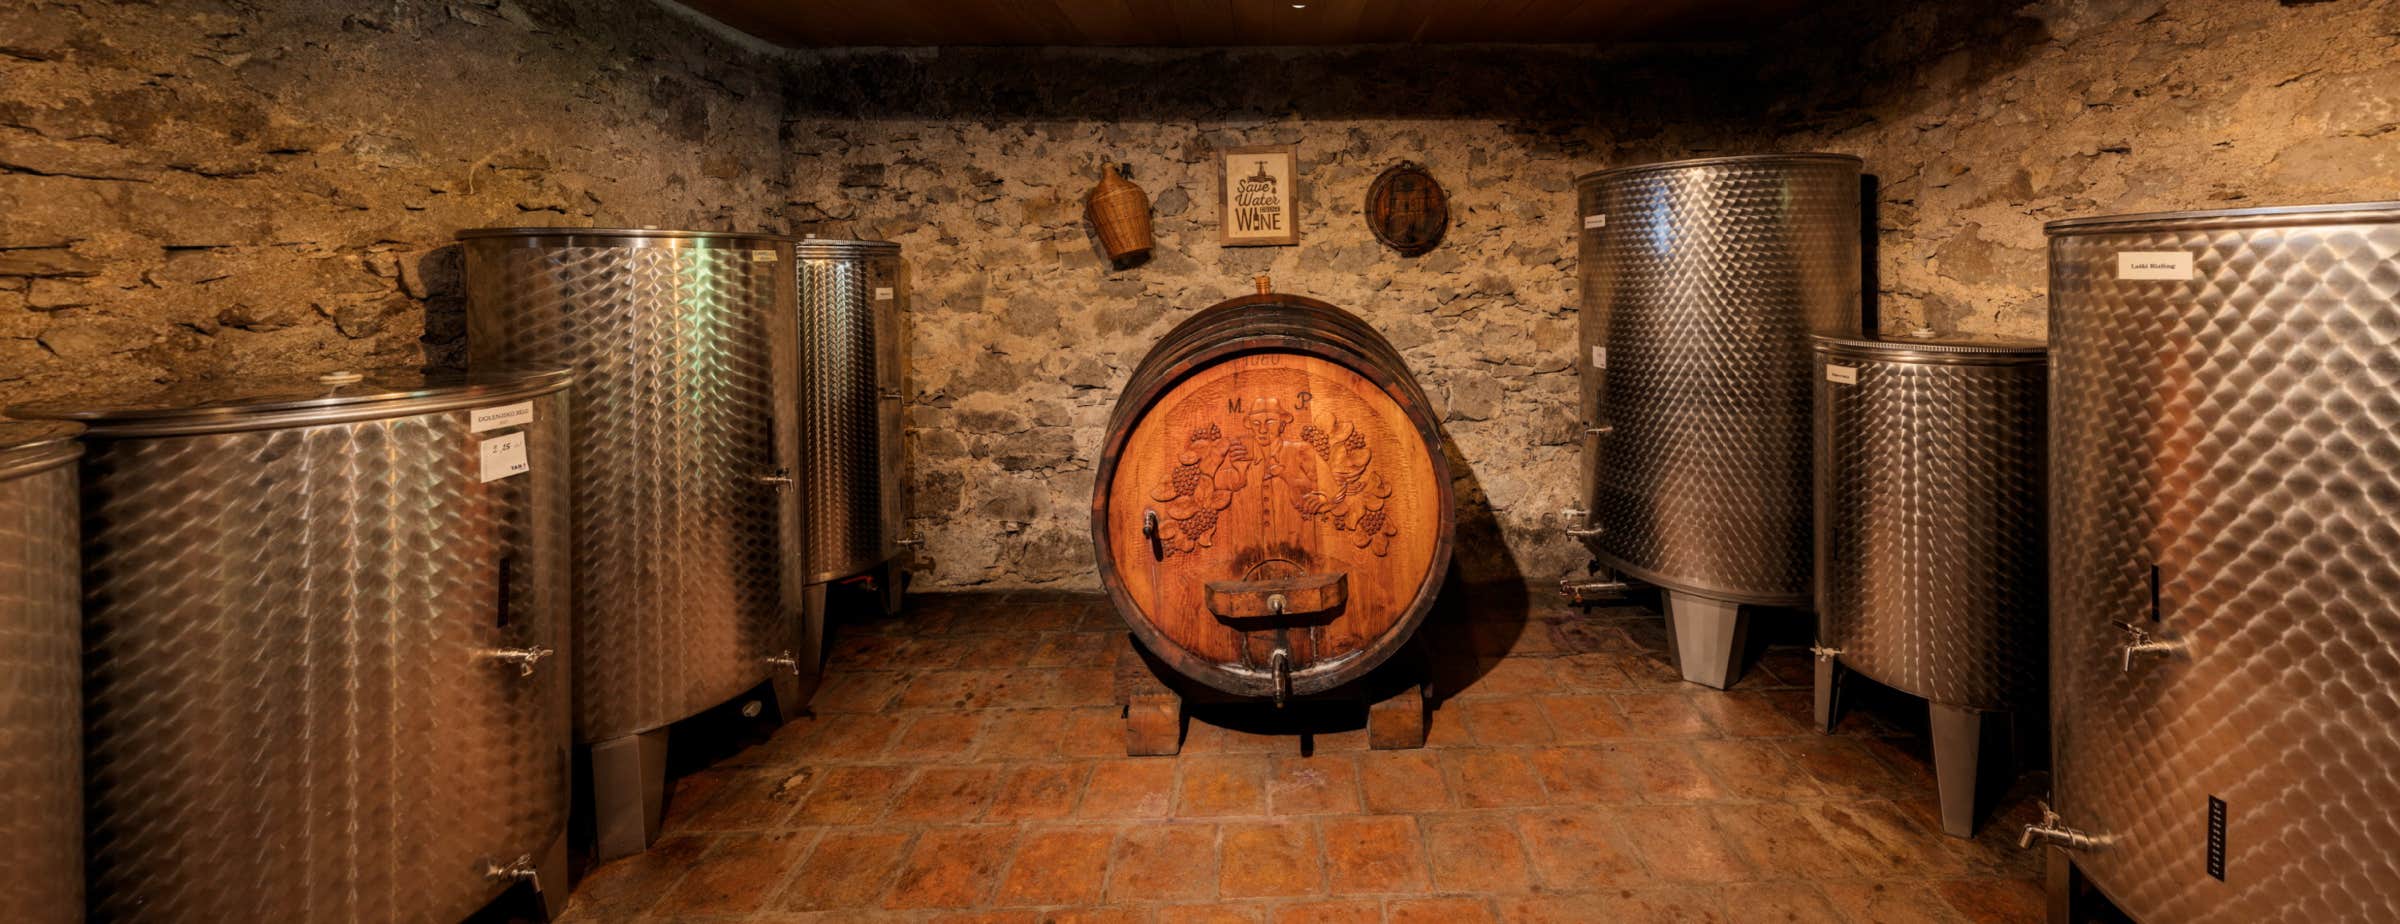 Image of a wine cellar showing a big wooden barrel with carvings of a man and grapes in front of the frontal wall in the middle of the picture. On the right and left side walls, multiple metal barrels are placed.